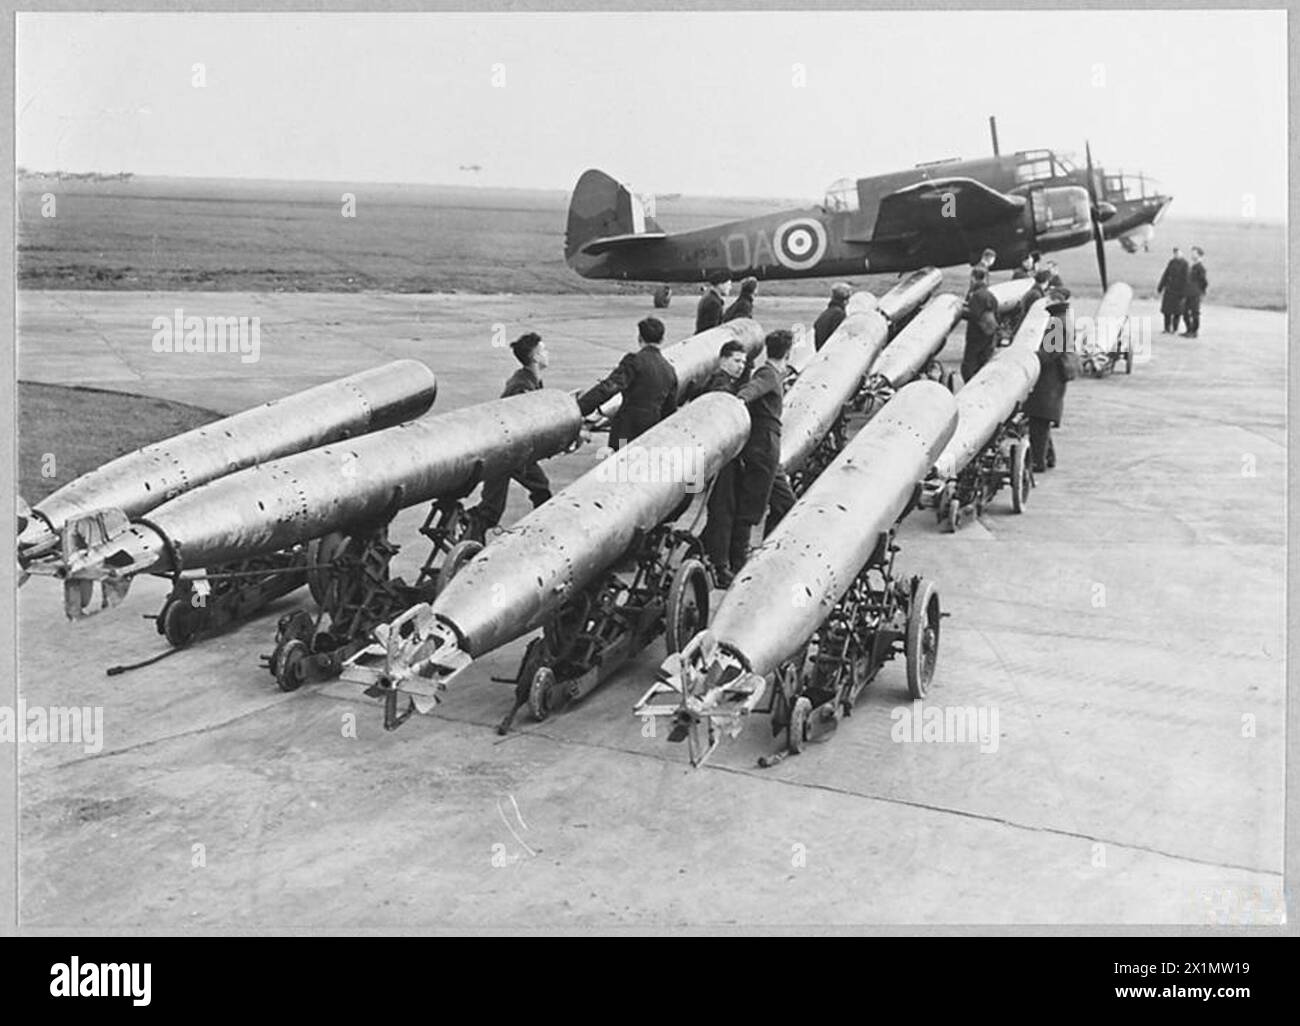 TORPEDO SECTION OF THE ROYAL AIR FORCE - Torpedoes on trolleys on the way to the aircraft, Royal Air Force Stock Photo